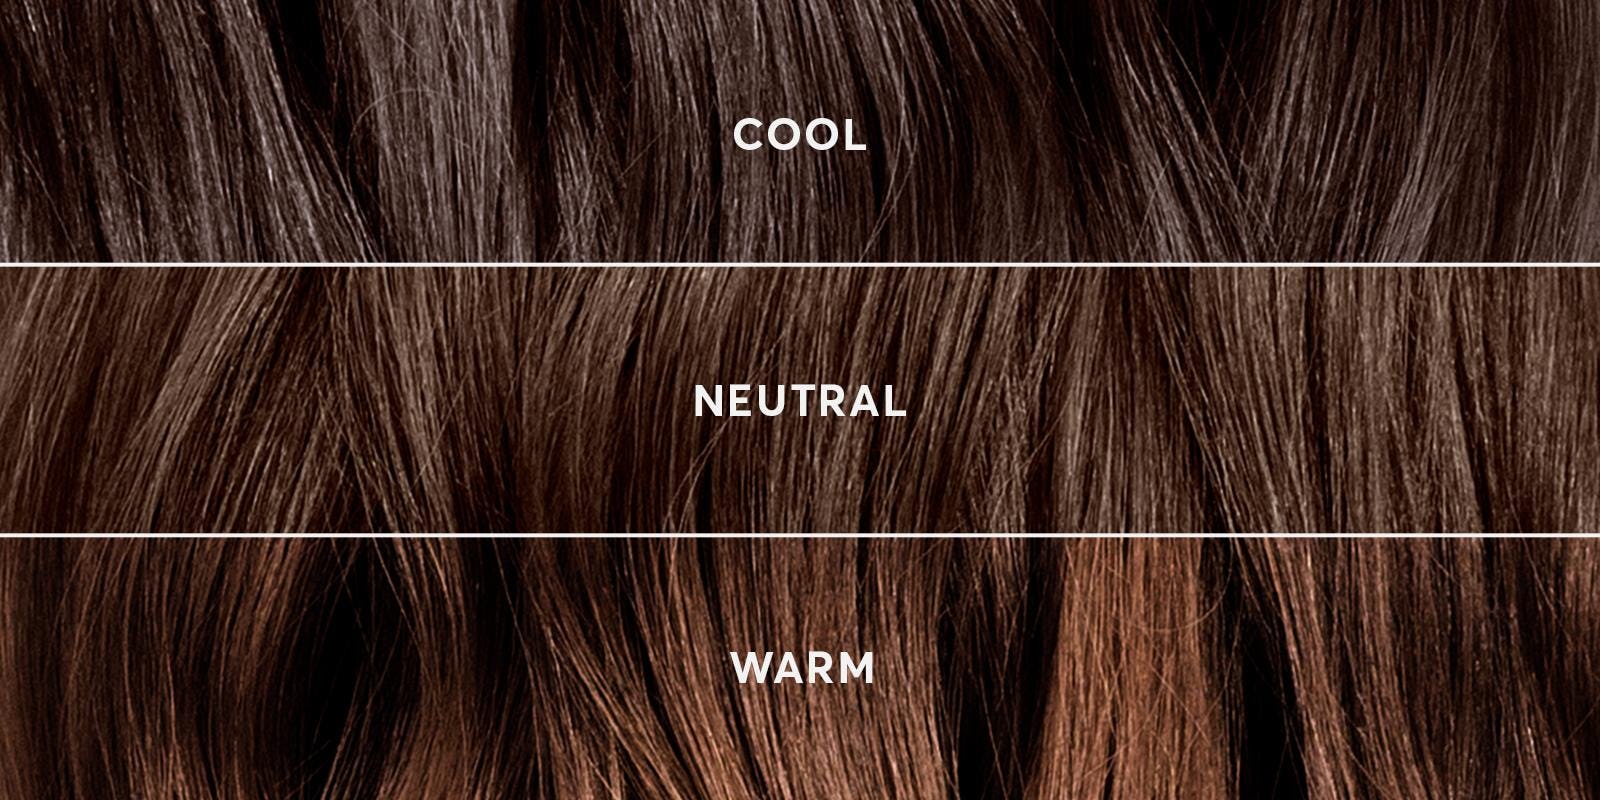 Is My Hair Color Warm or Cool?